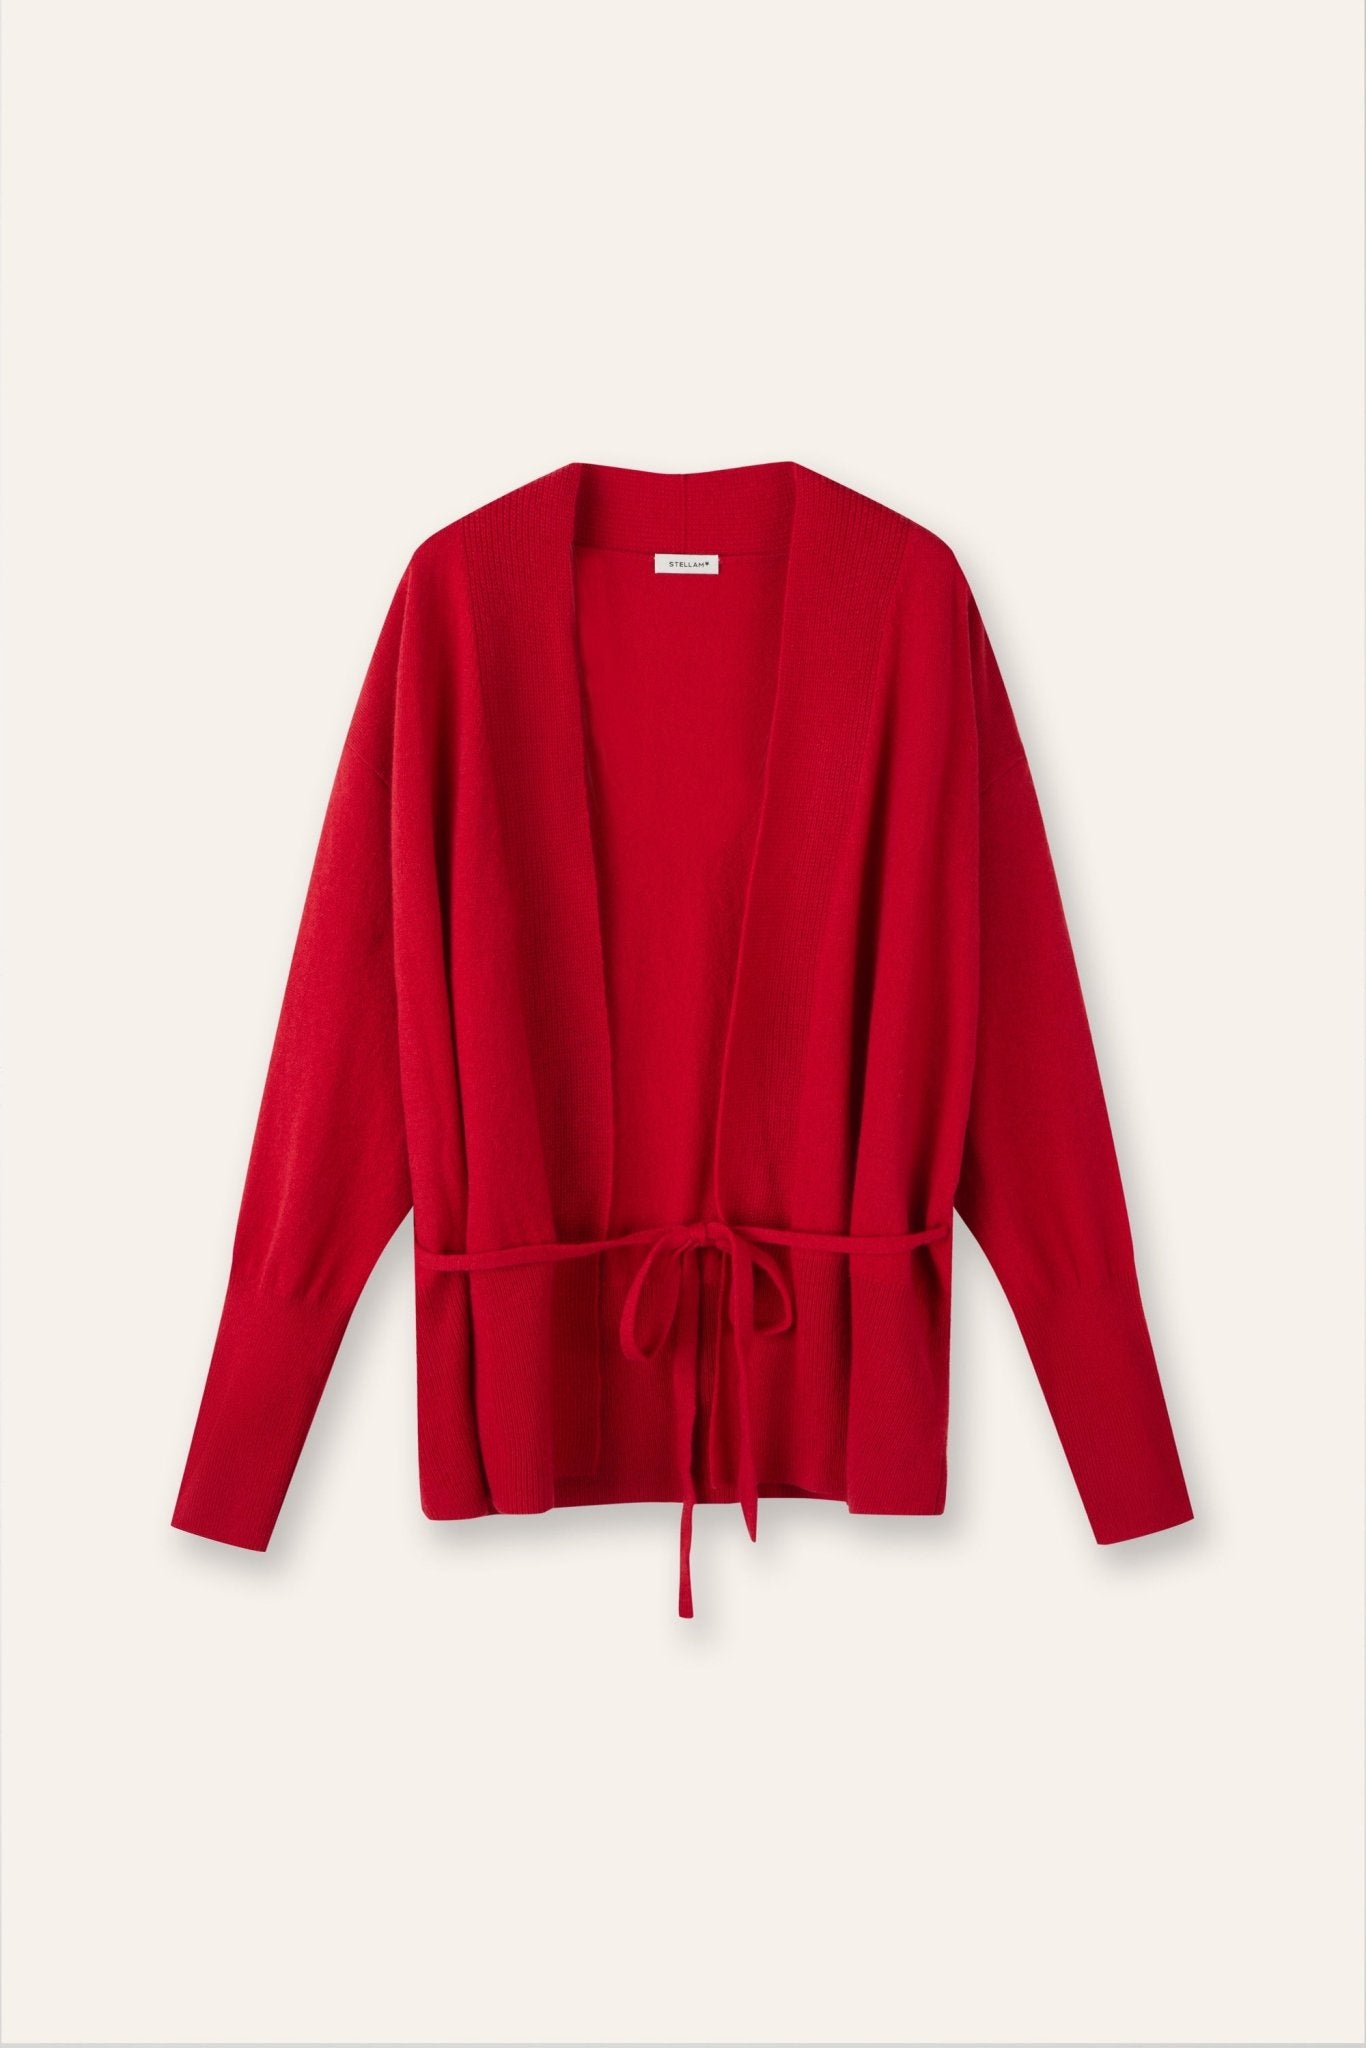 KAY cashmere-blended cardigan (Red) - STELLAM